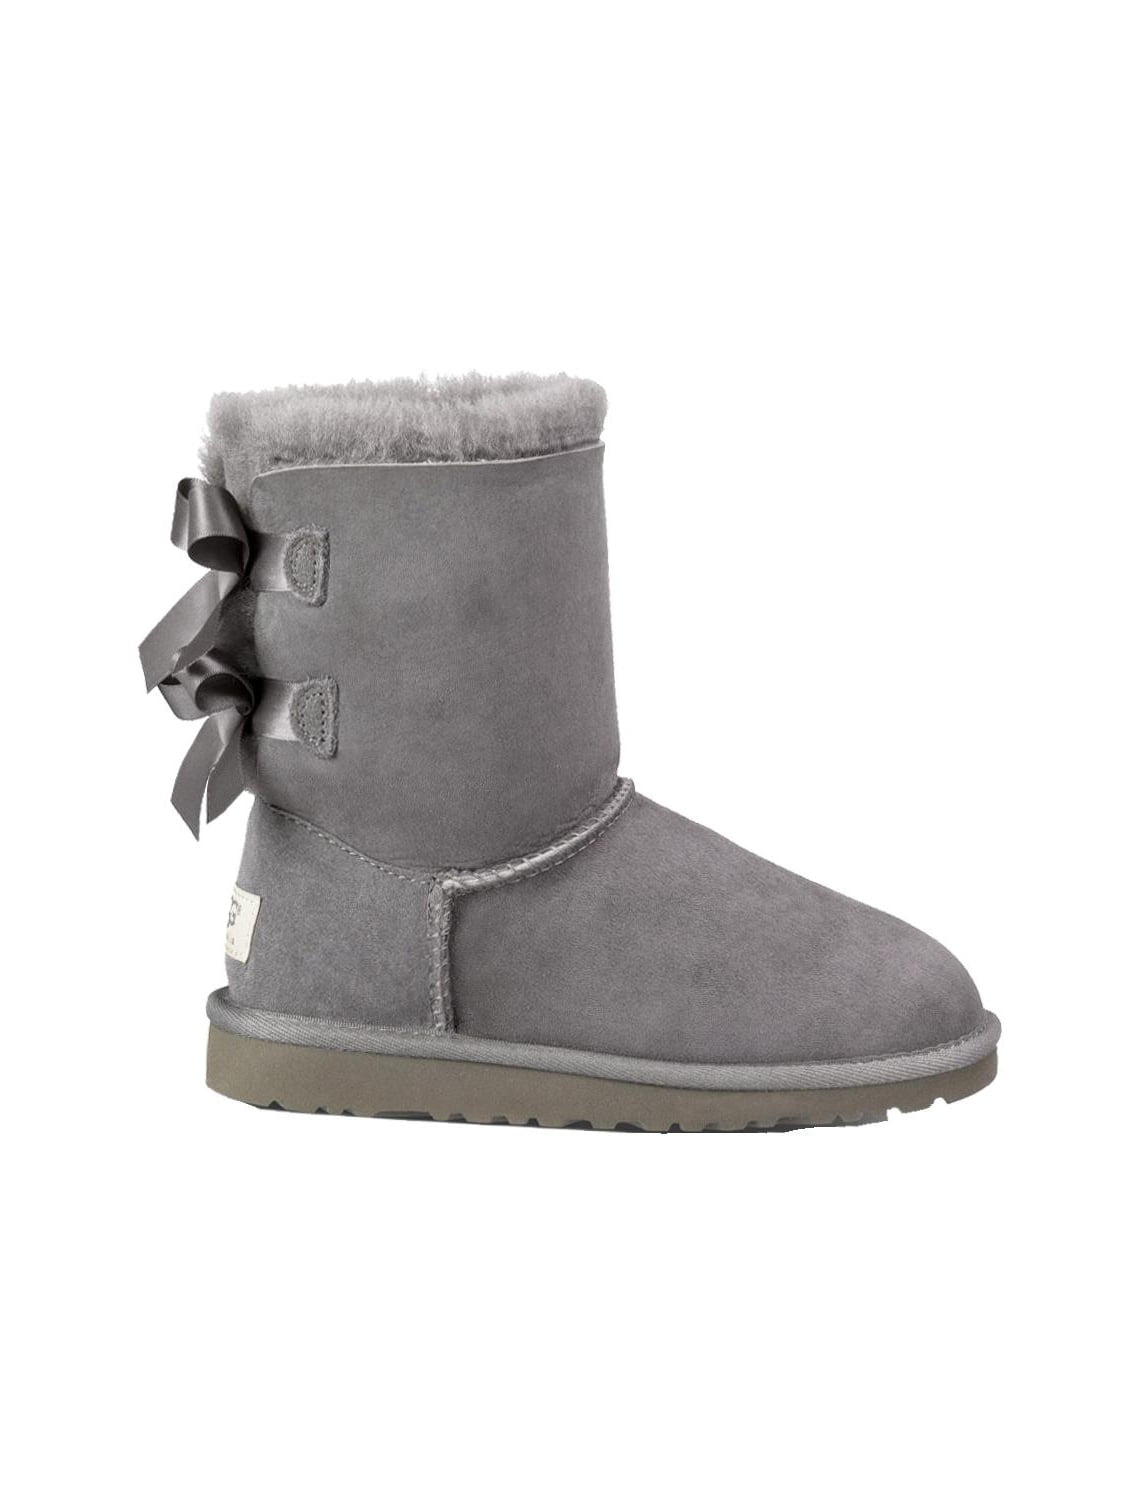 Uggs Bailey Bow Boots  Toddlers Style : 3280